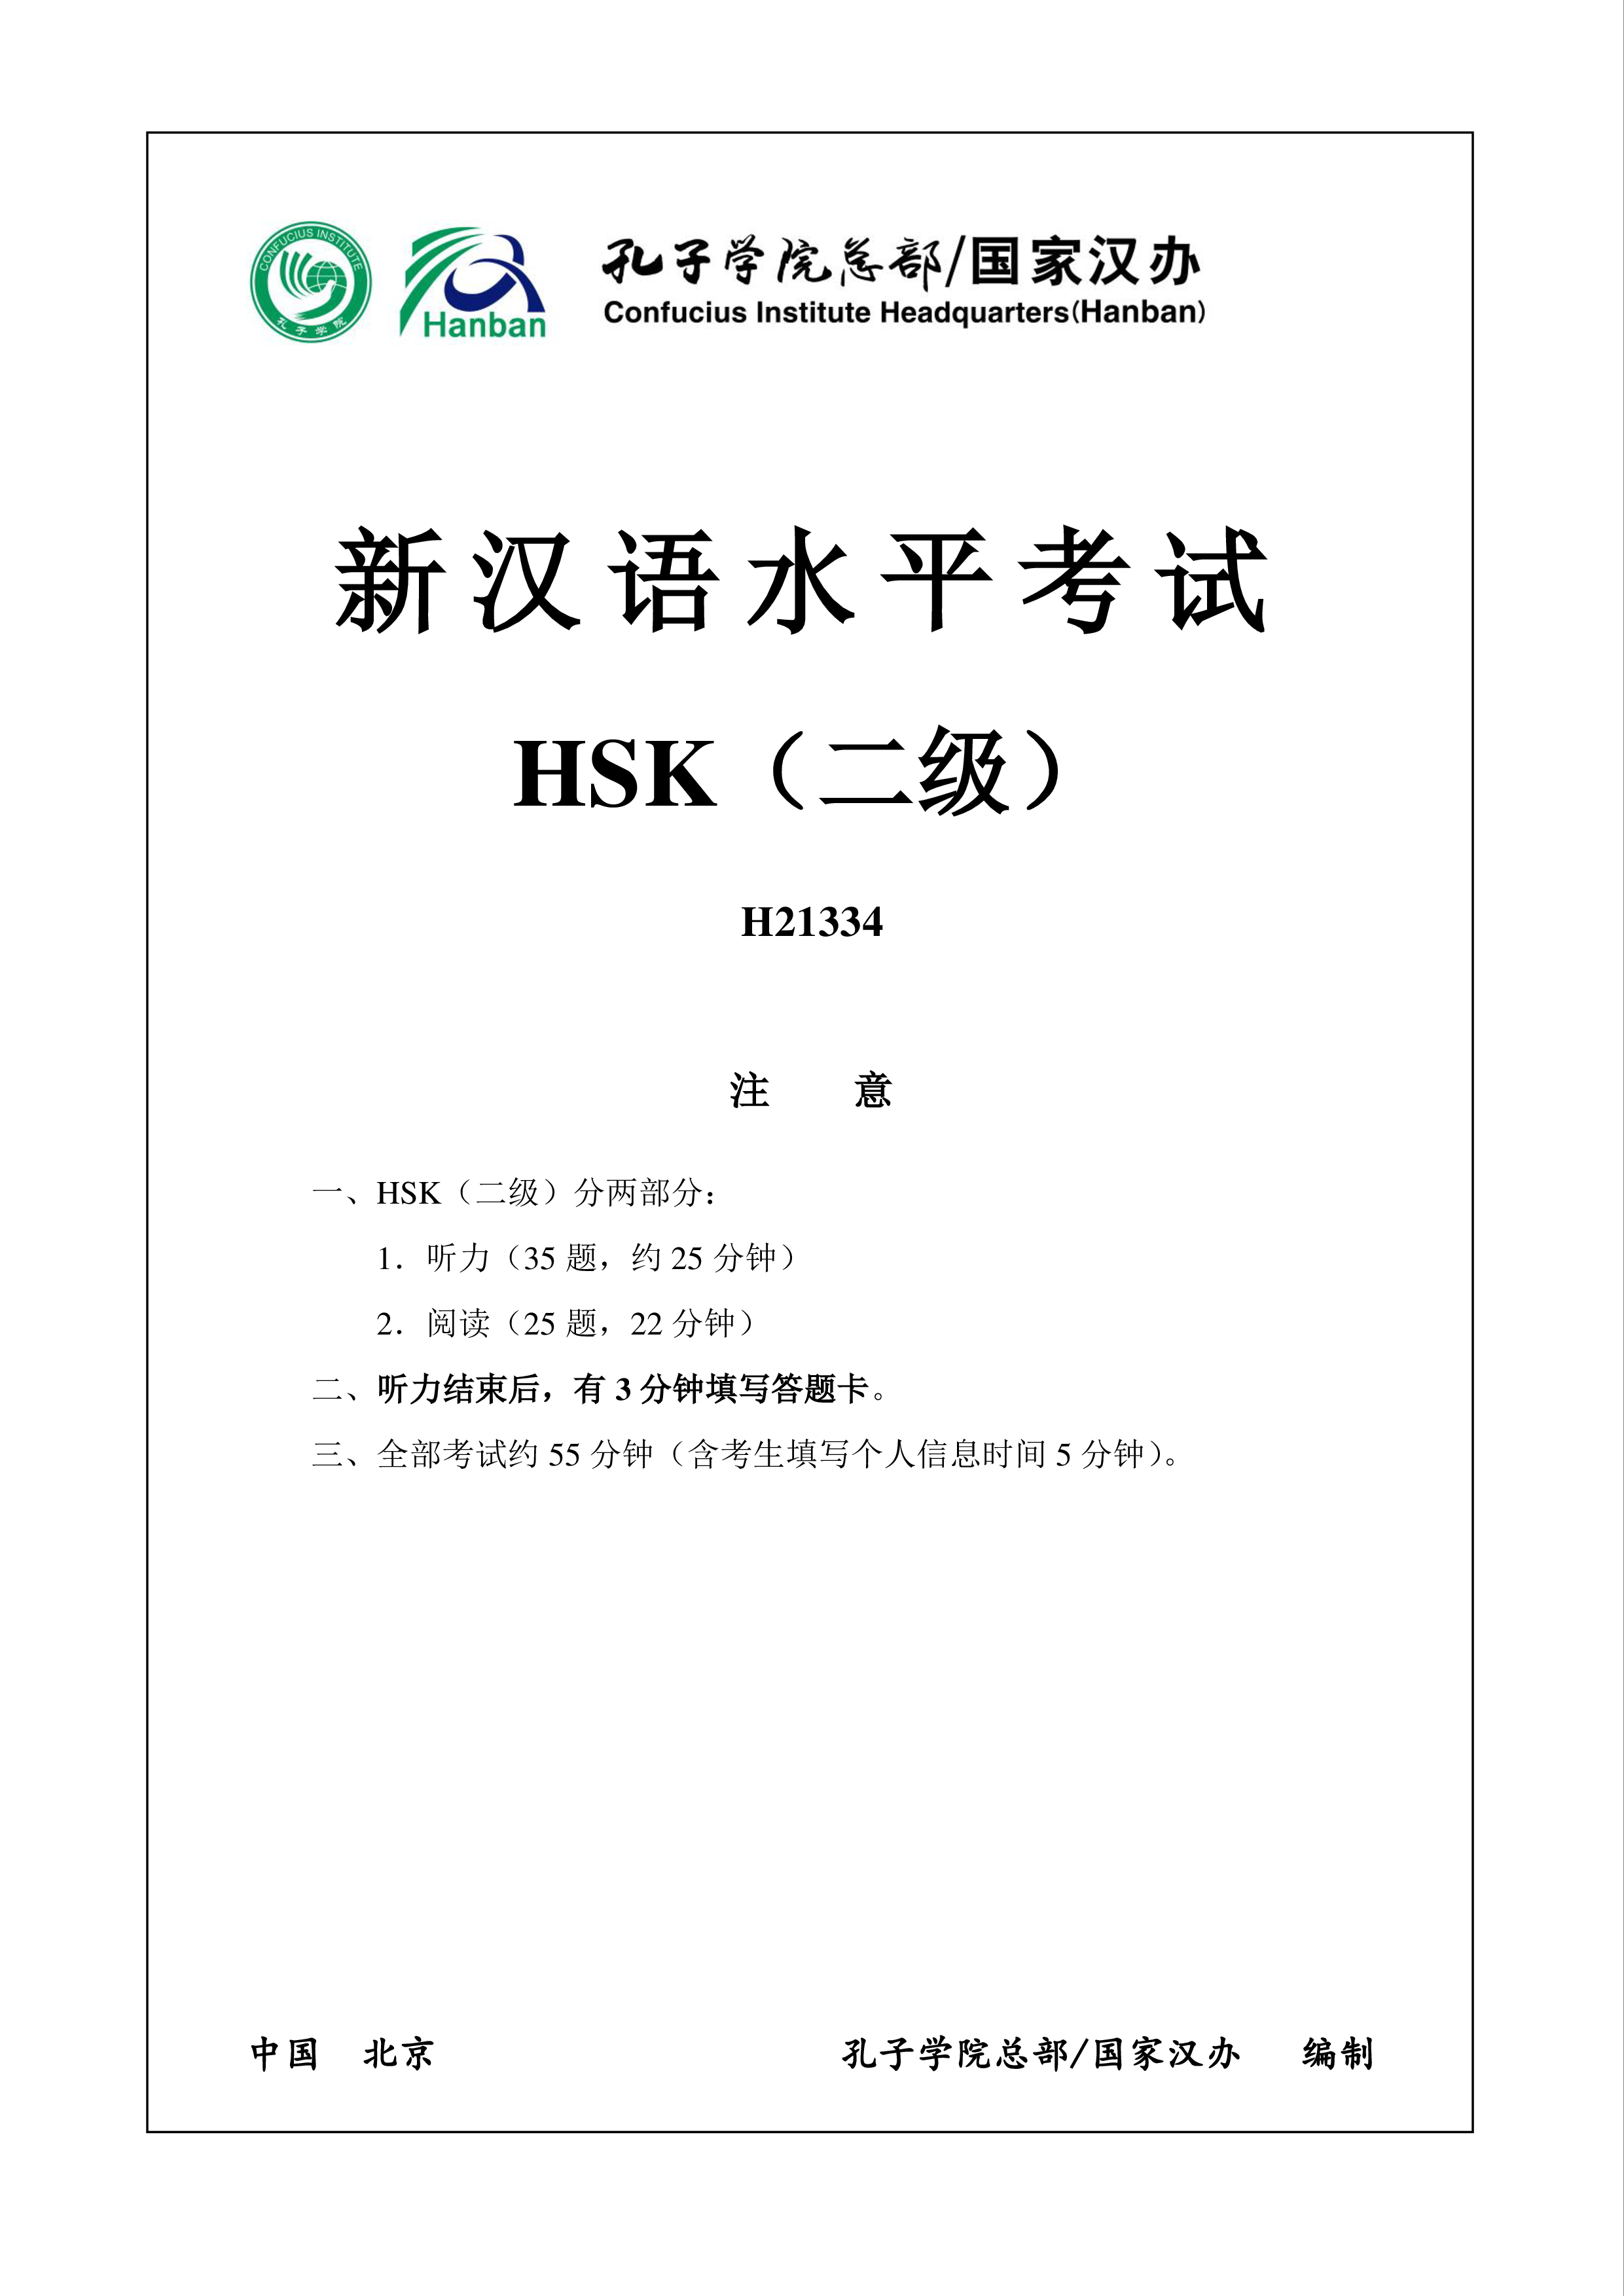 HSK2 Chinese Exam including Answers # HSK2 H21334 模板